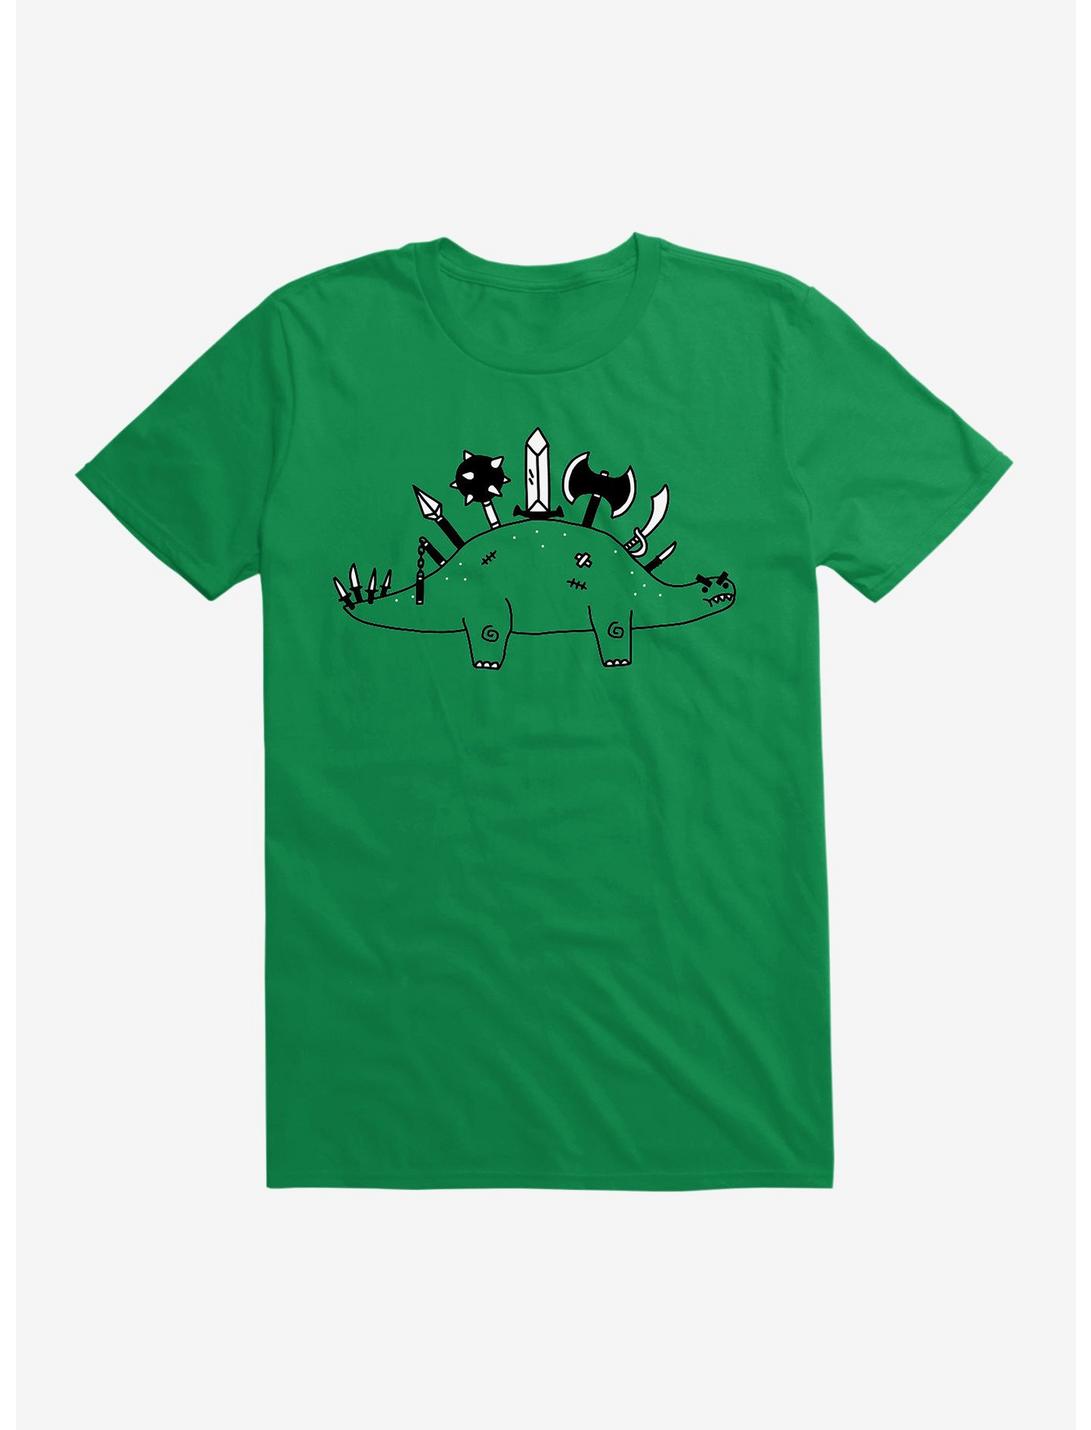 The Best Defense Is A Good Offense T-Shirt, KELLY GREEN, hi-res